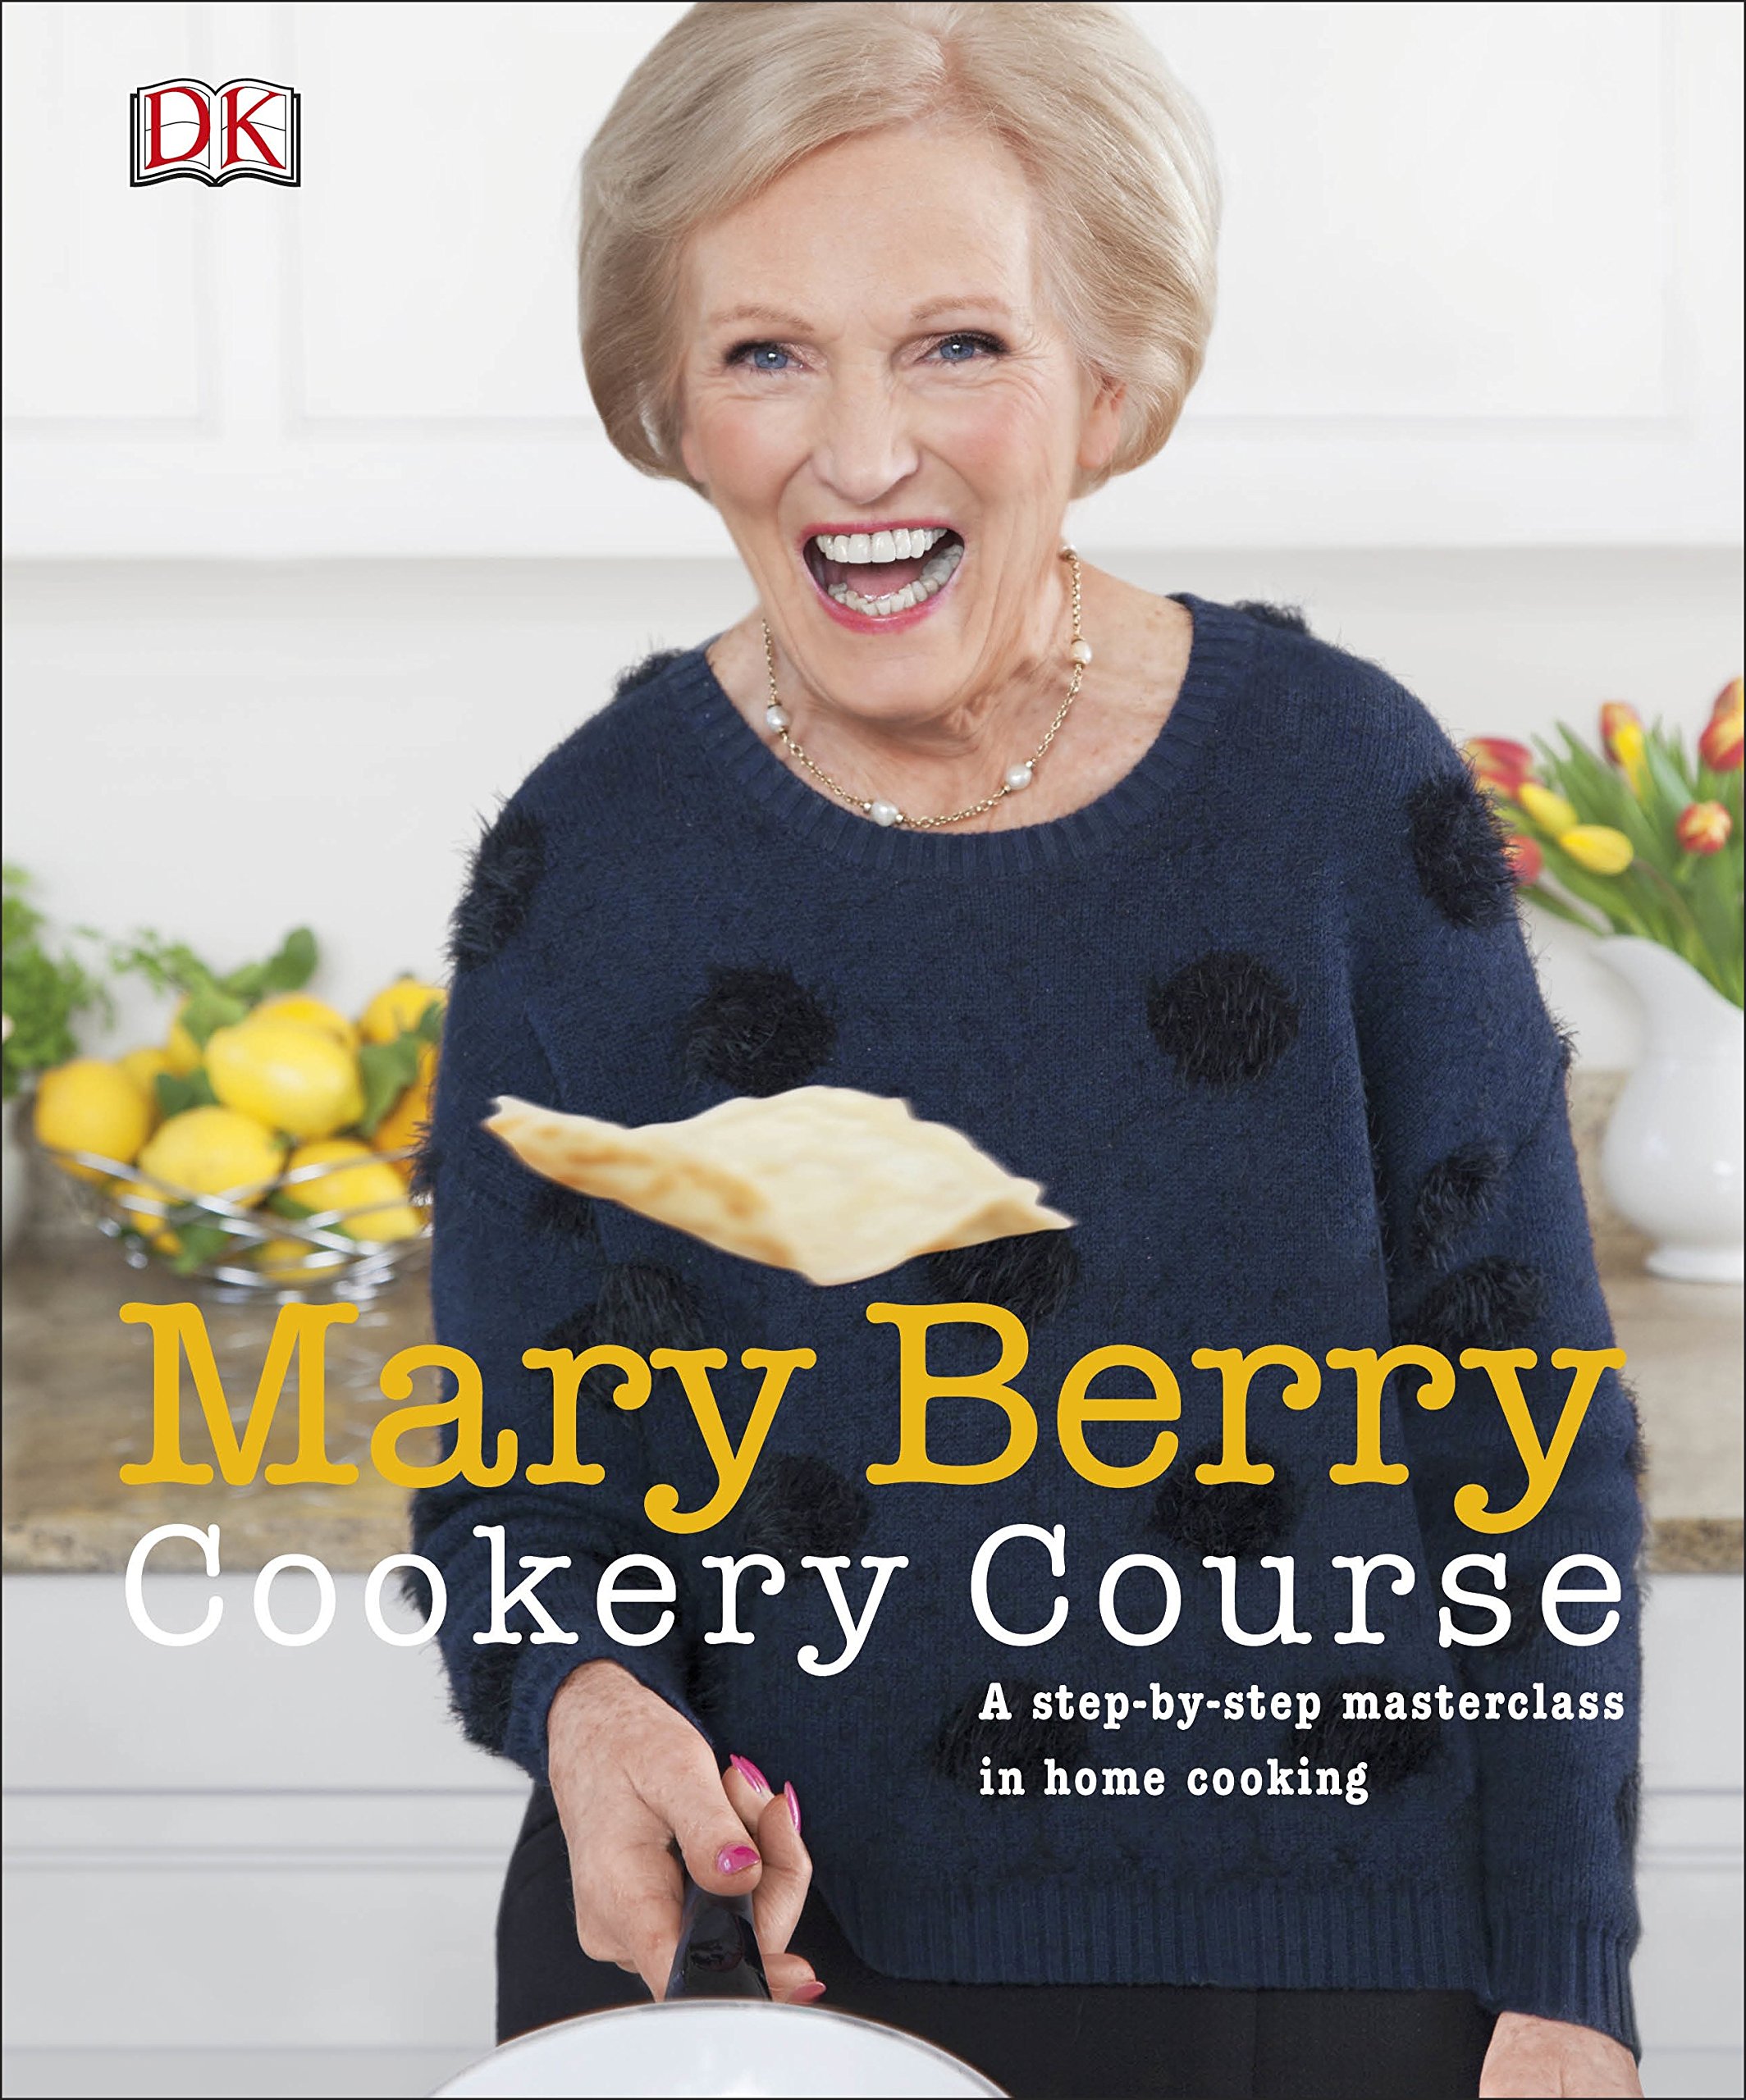 Mary Berry Cookery Course | Mary Berry image3